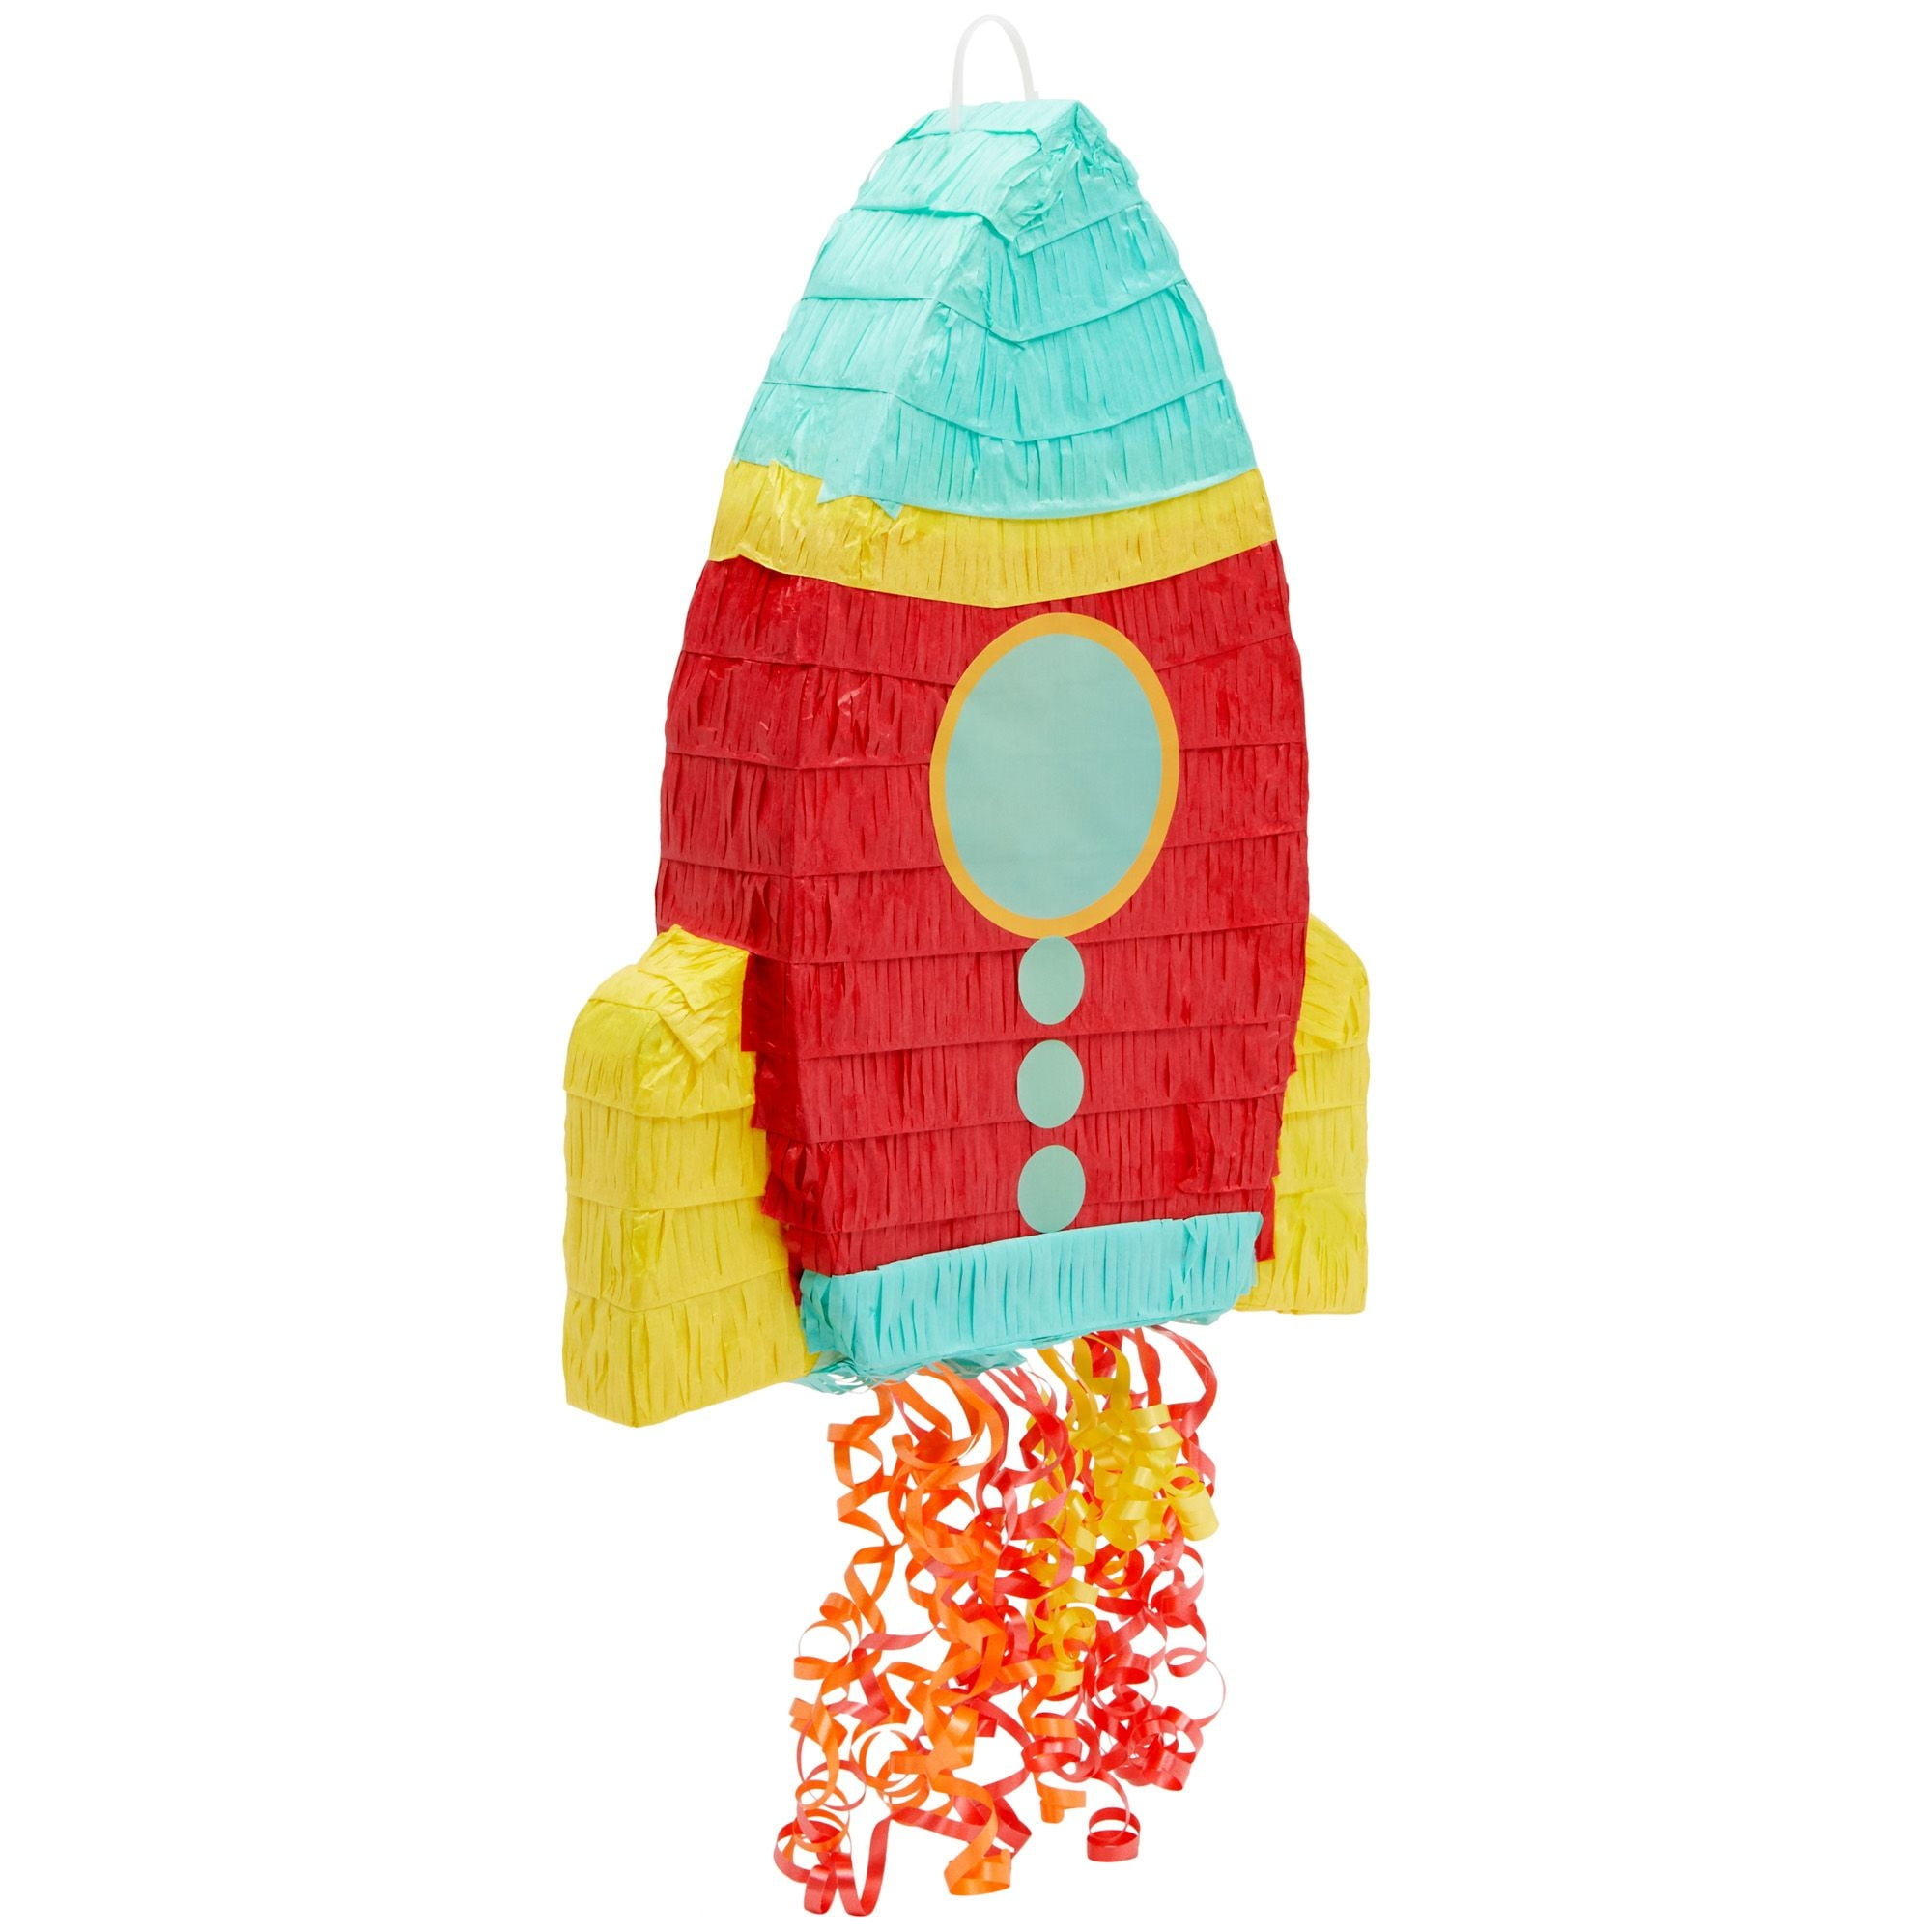 Pull String Rocket Ship Pinata - Outer Space Party Decorations for  Astronaut Themed Birthday (Small, 16.5 x 12.5 x 3 in)